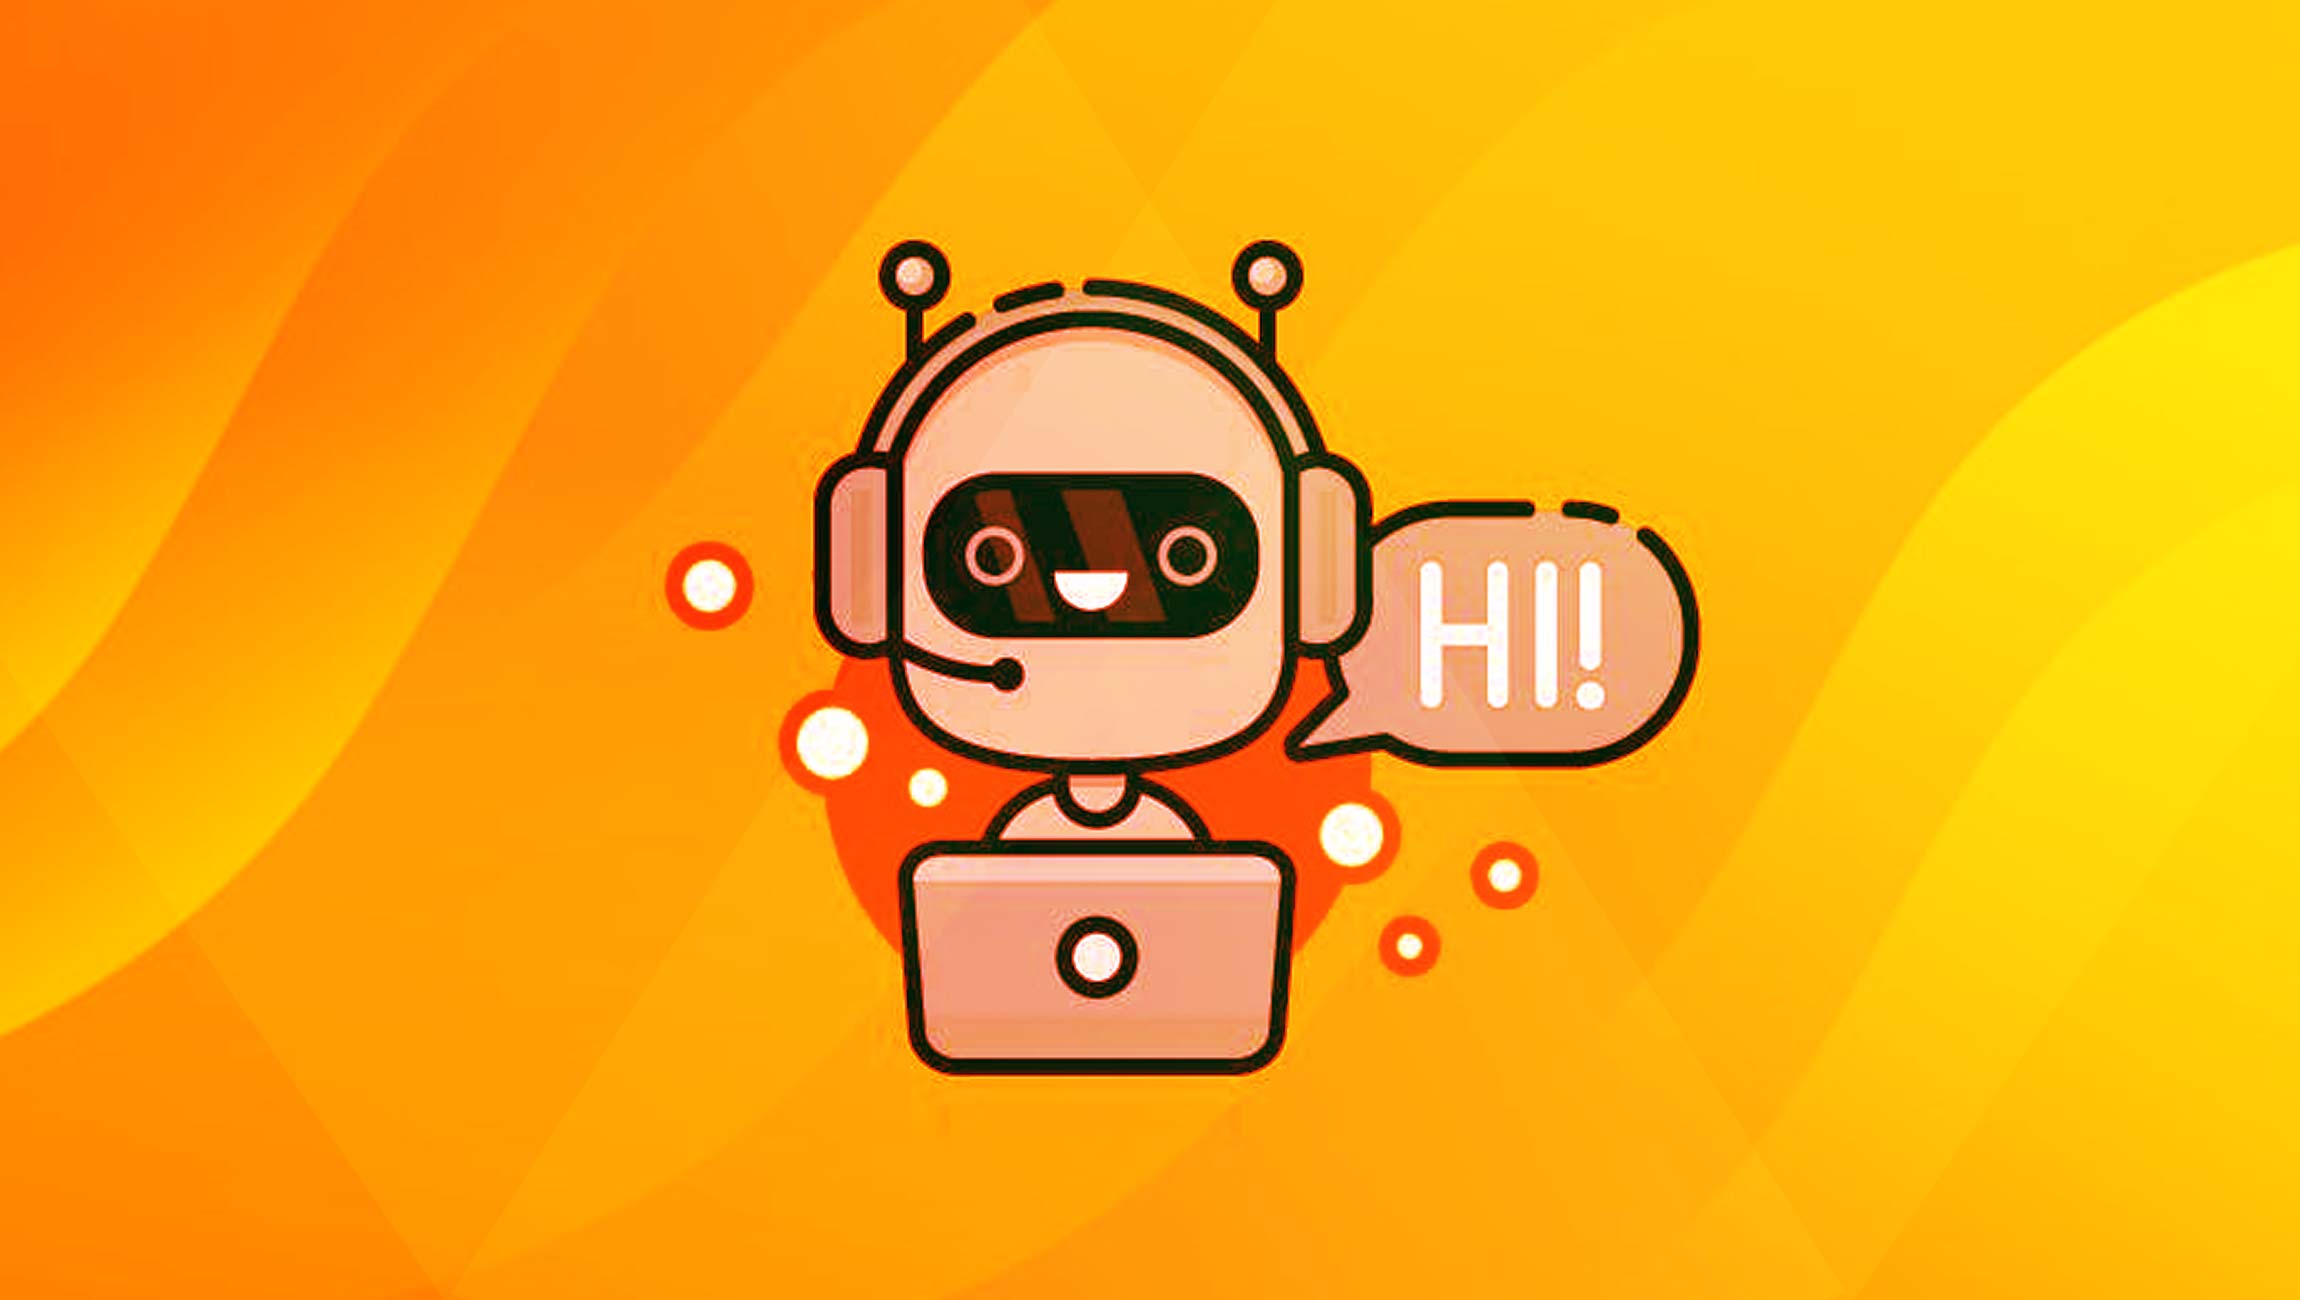 What Makes a Great Chatbot